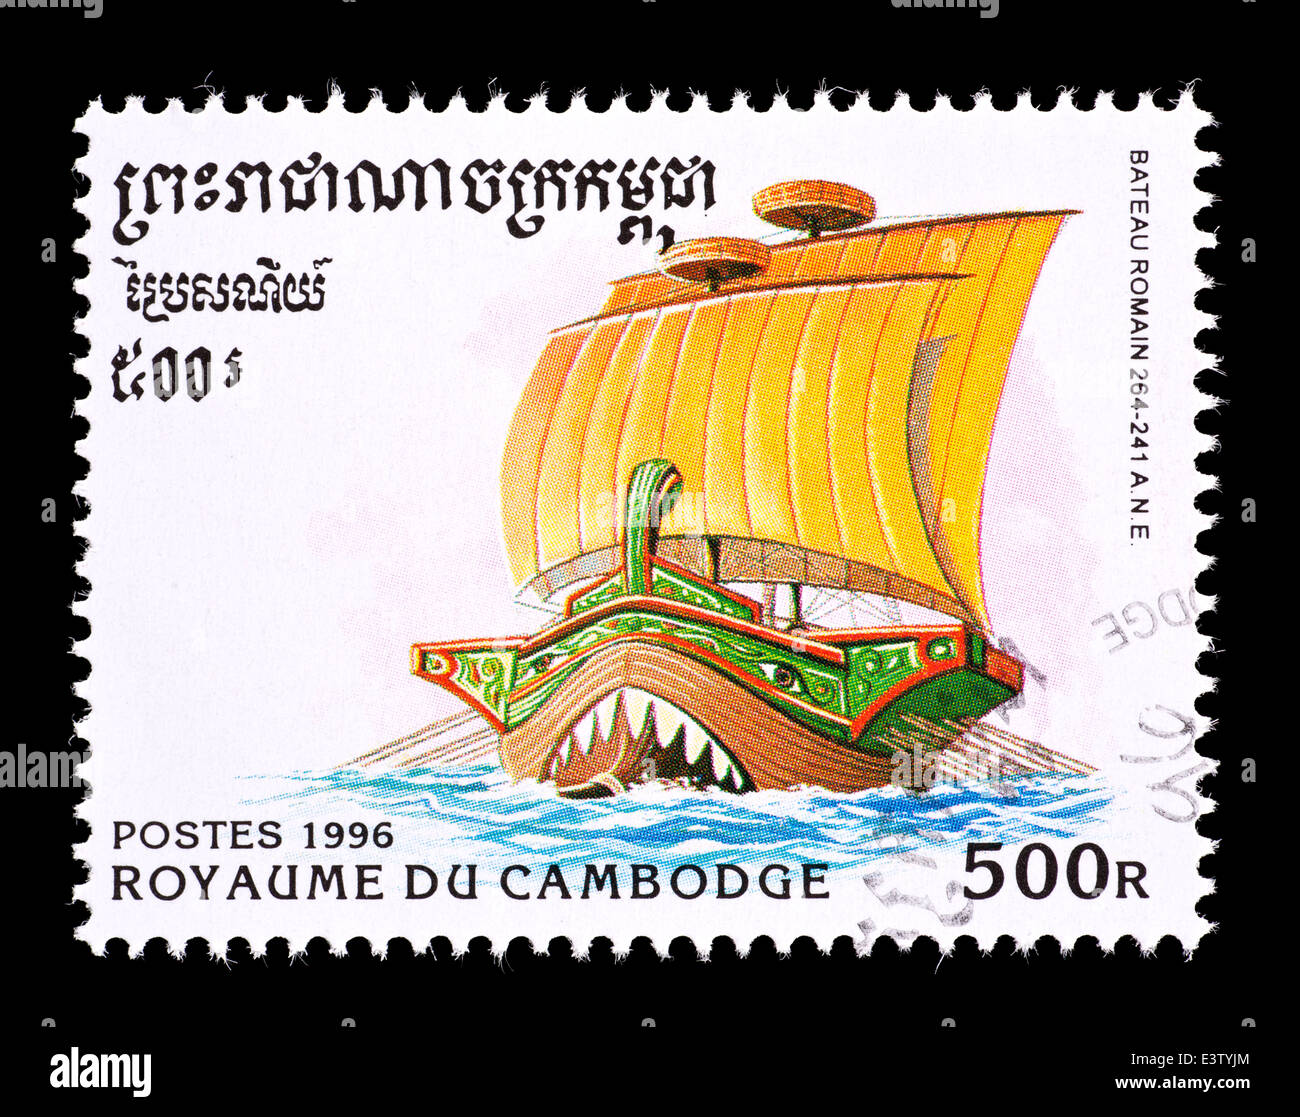 Postage stamp from Cambodia depicting a Roman galley ship. Stock Photo